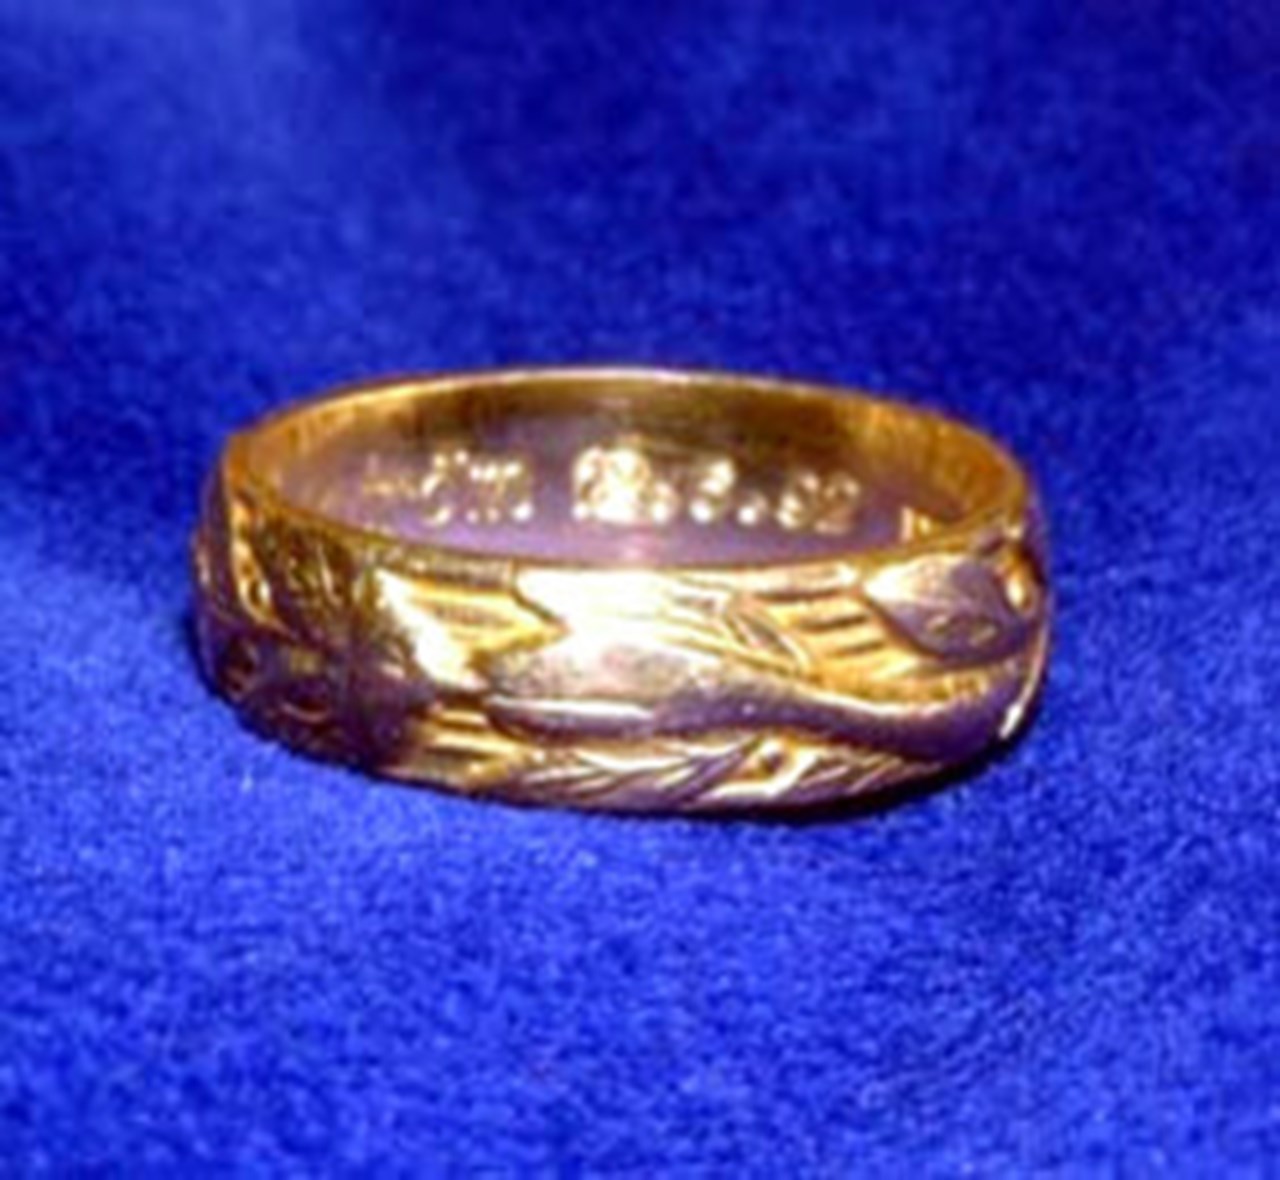 Photo of a doctoral ring.